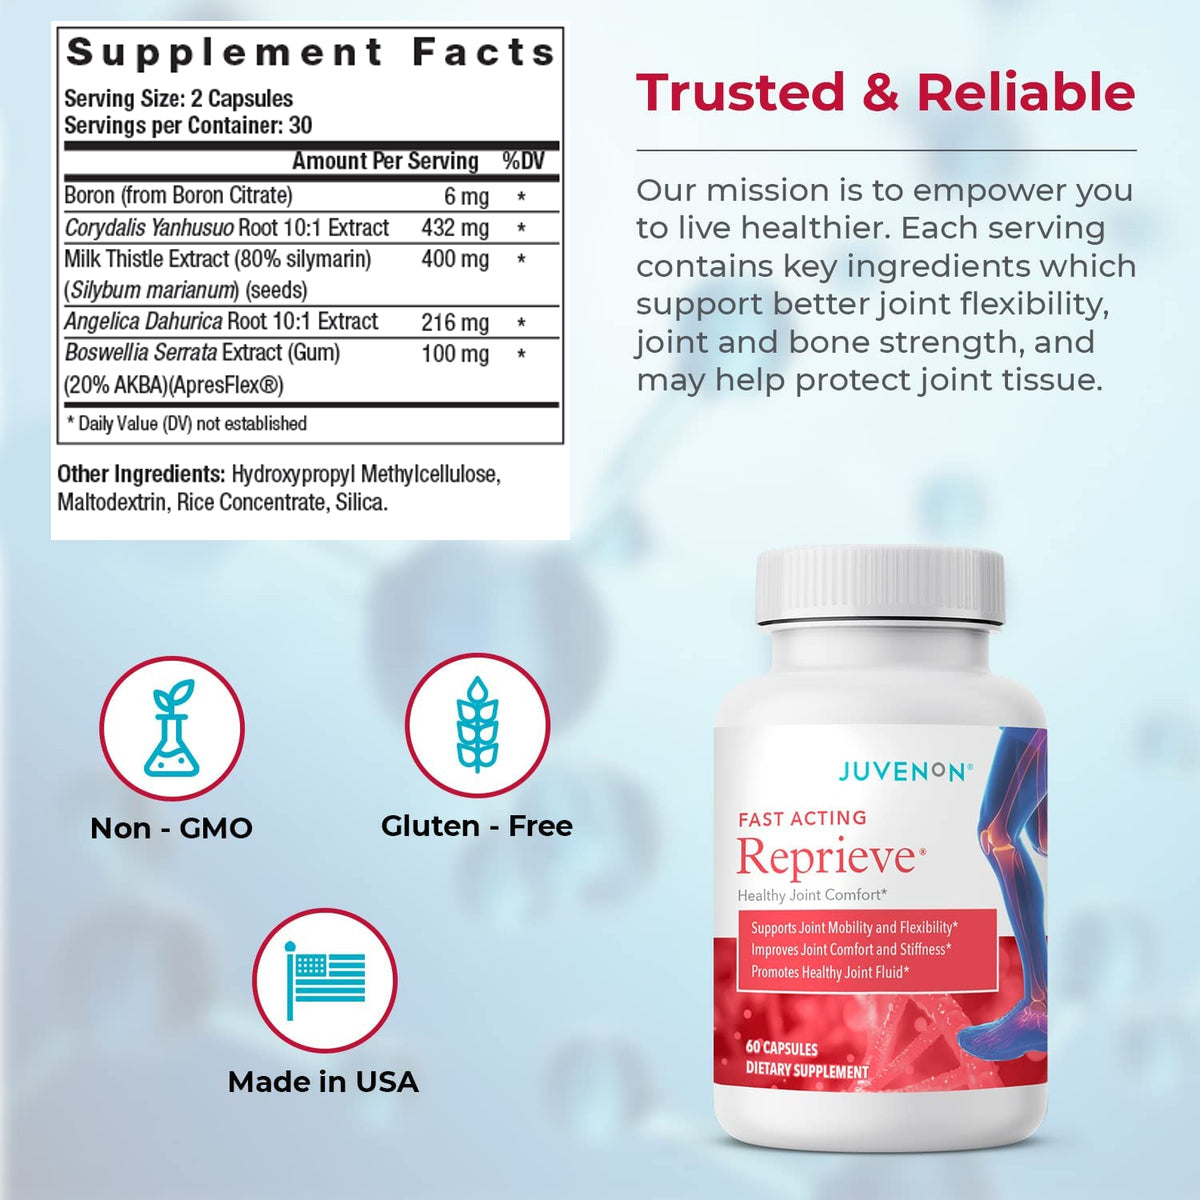 Juvenon fast-acting Reprieve supplement facts